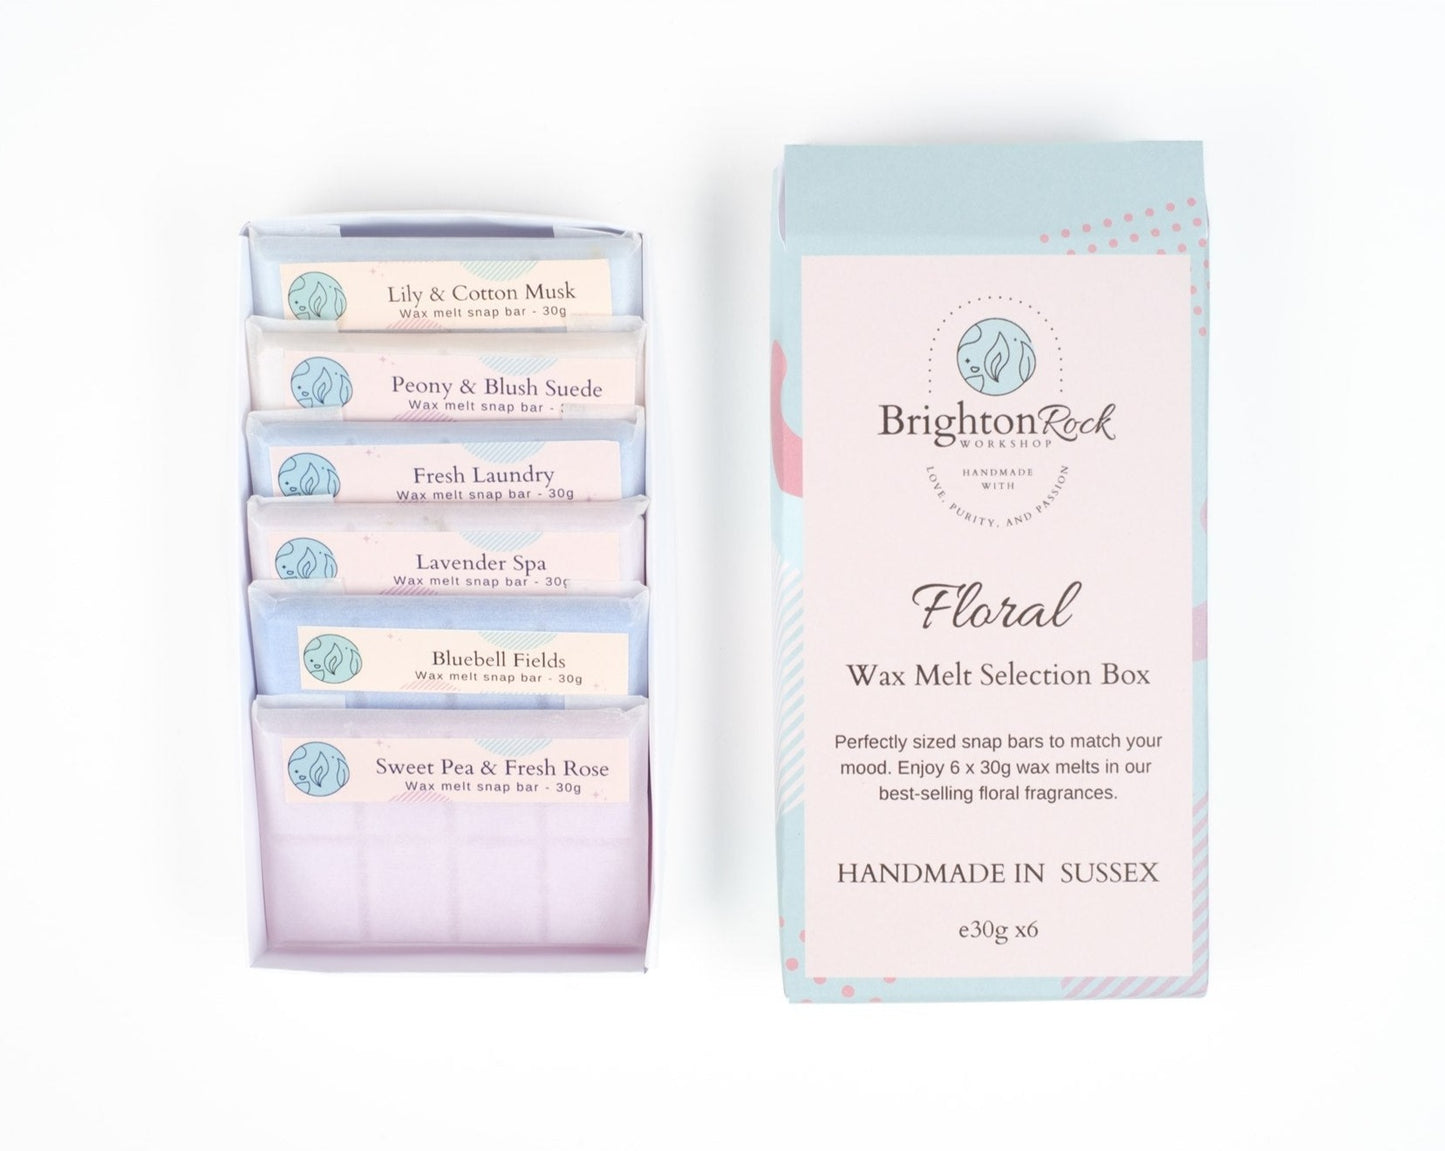 Floral fragrances Brighton Rock Workshop wax melt snap bar selection box. enjoy 6 x 30 gram bars in our best selling floral scents. Eco friendly product and packaging. sustainable, vegan friendly and cruelty free